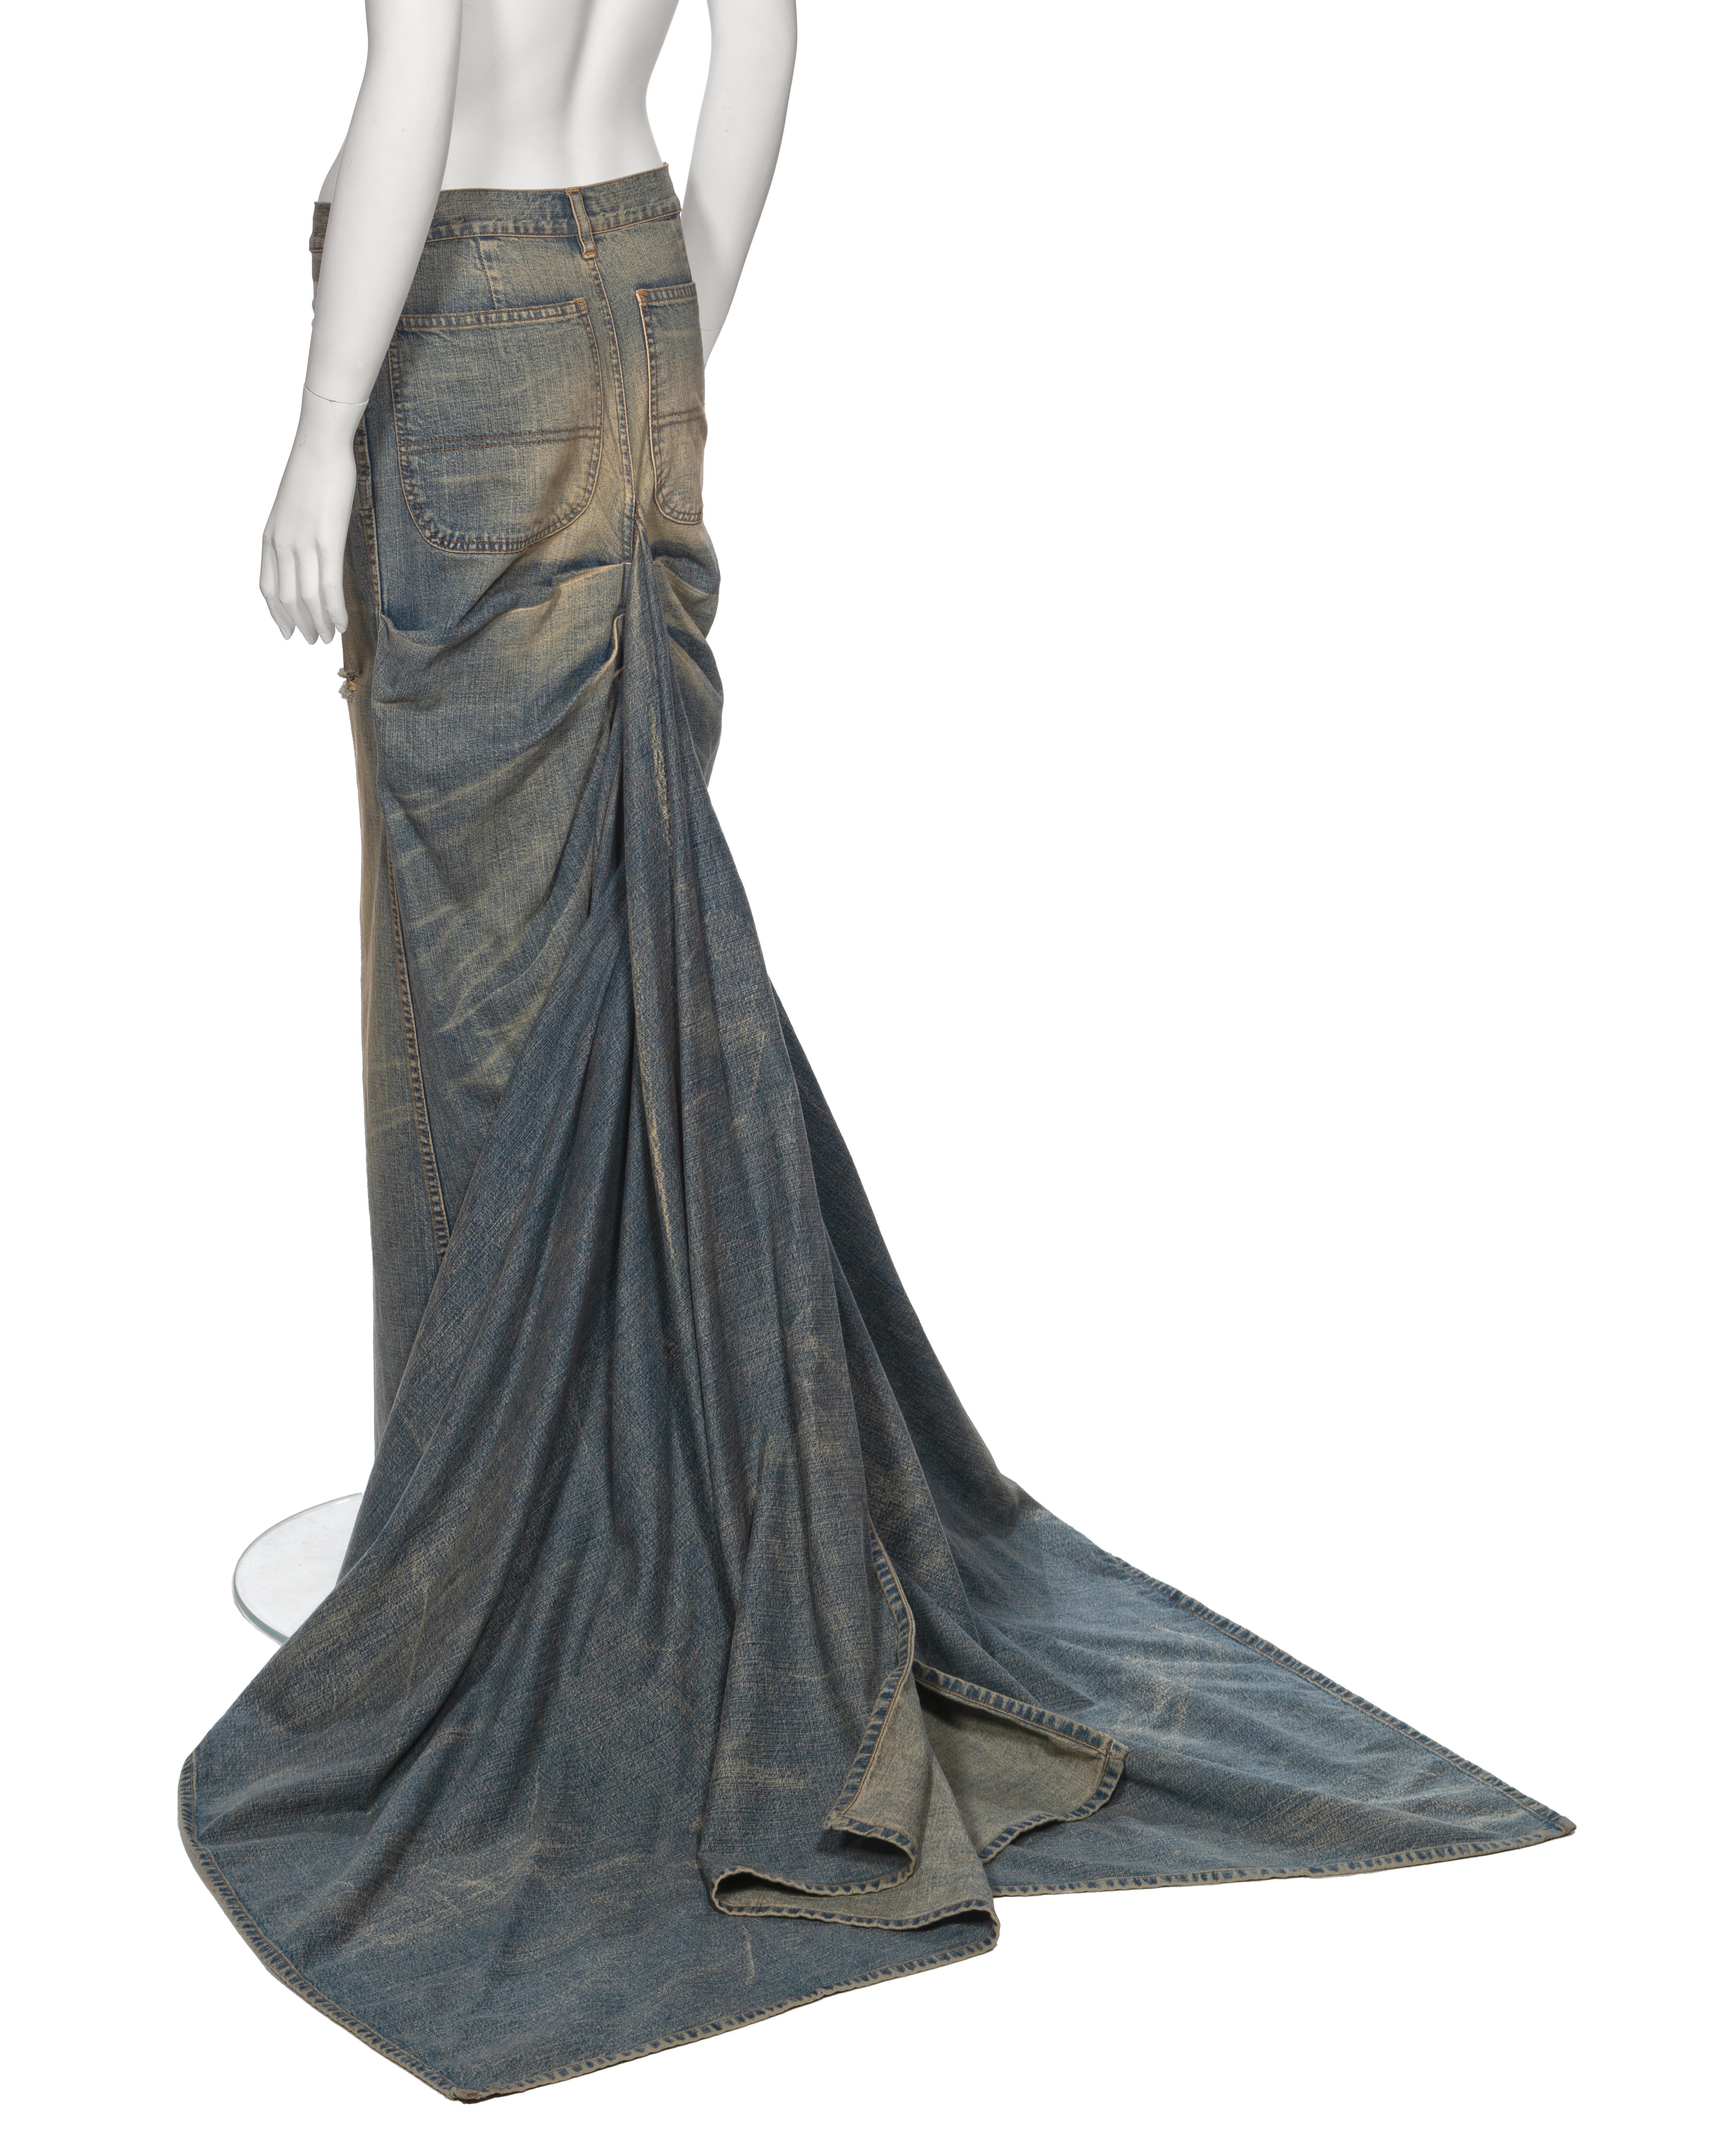 Ralph Lauren Distressed Sand Washed Denim Maxi Skirt with Train, ss 2003 For Sale 6